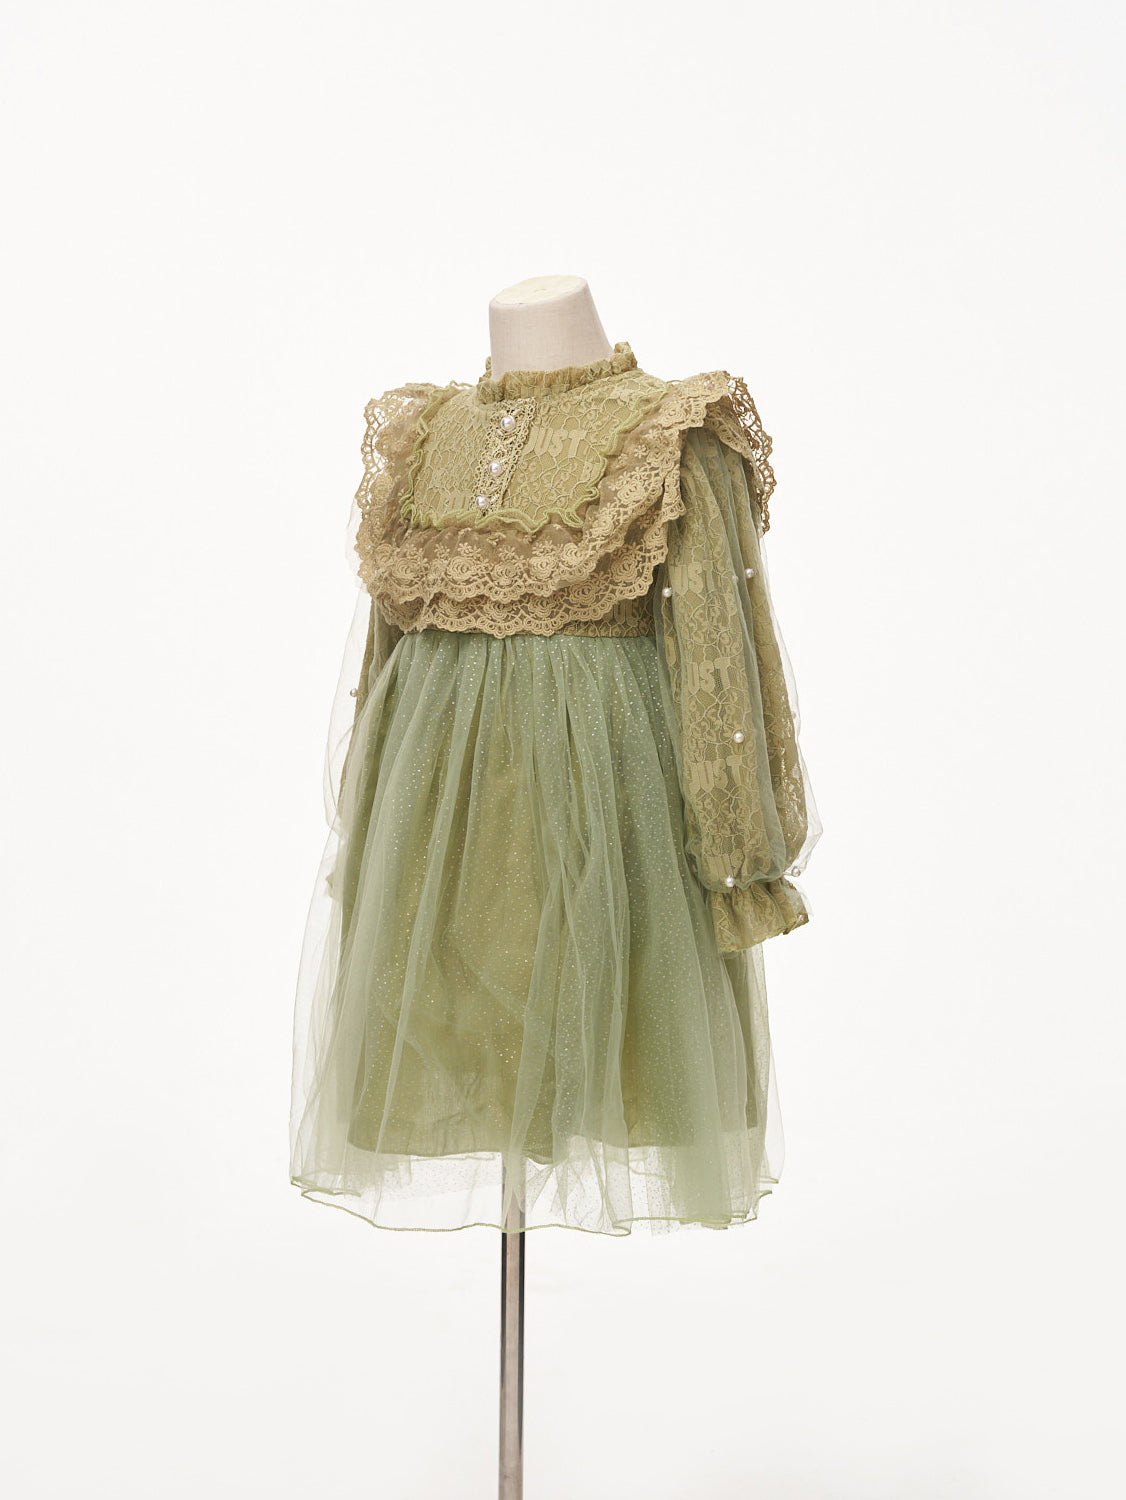 Kate Lime Green Lace Tulle Princess Kids Dress for Photography